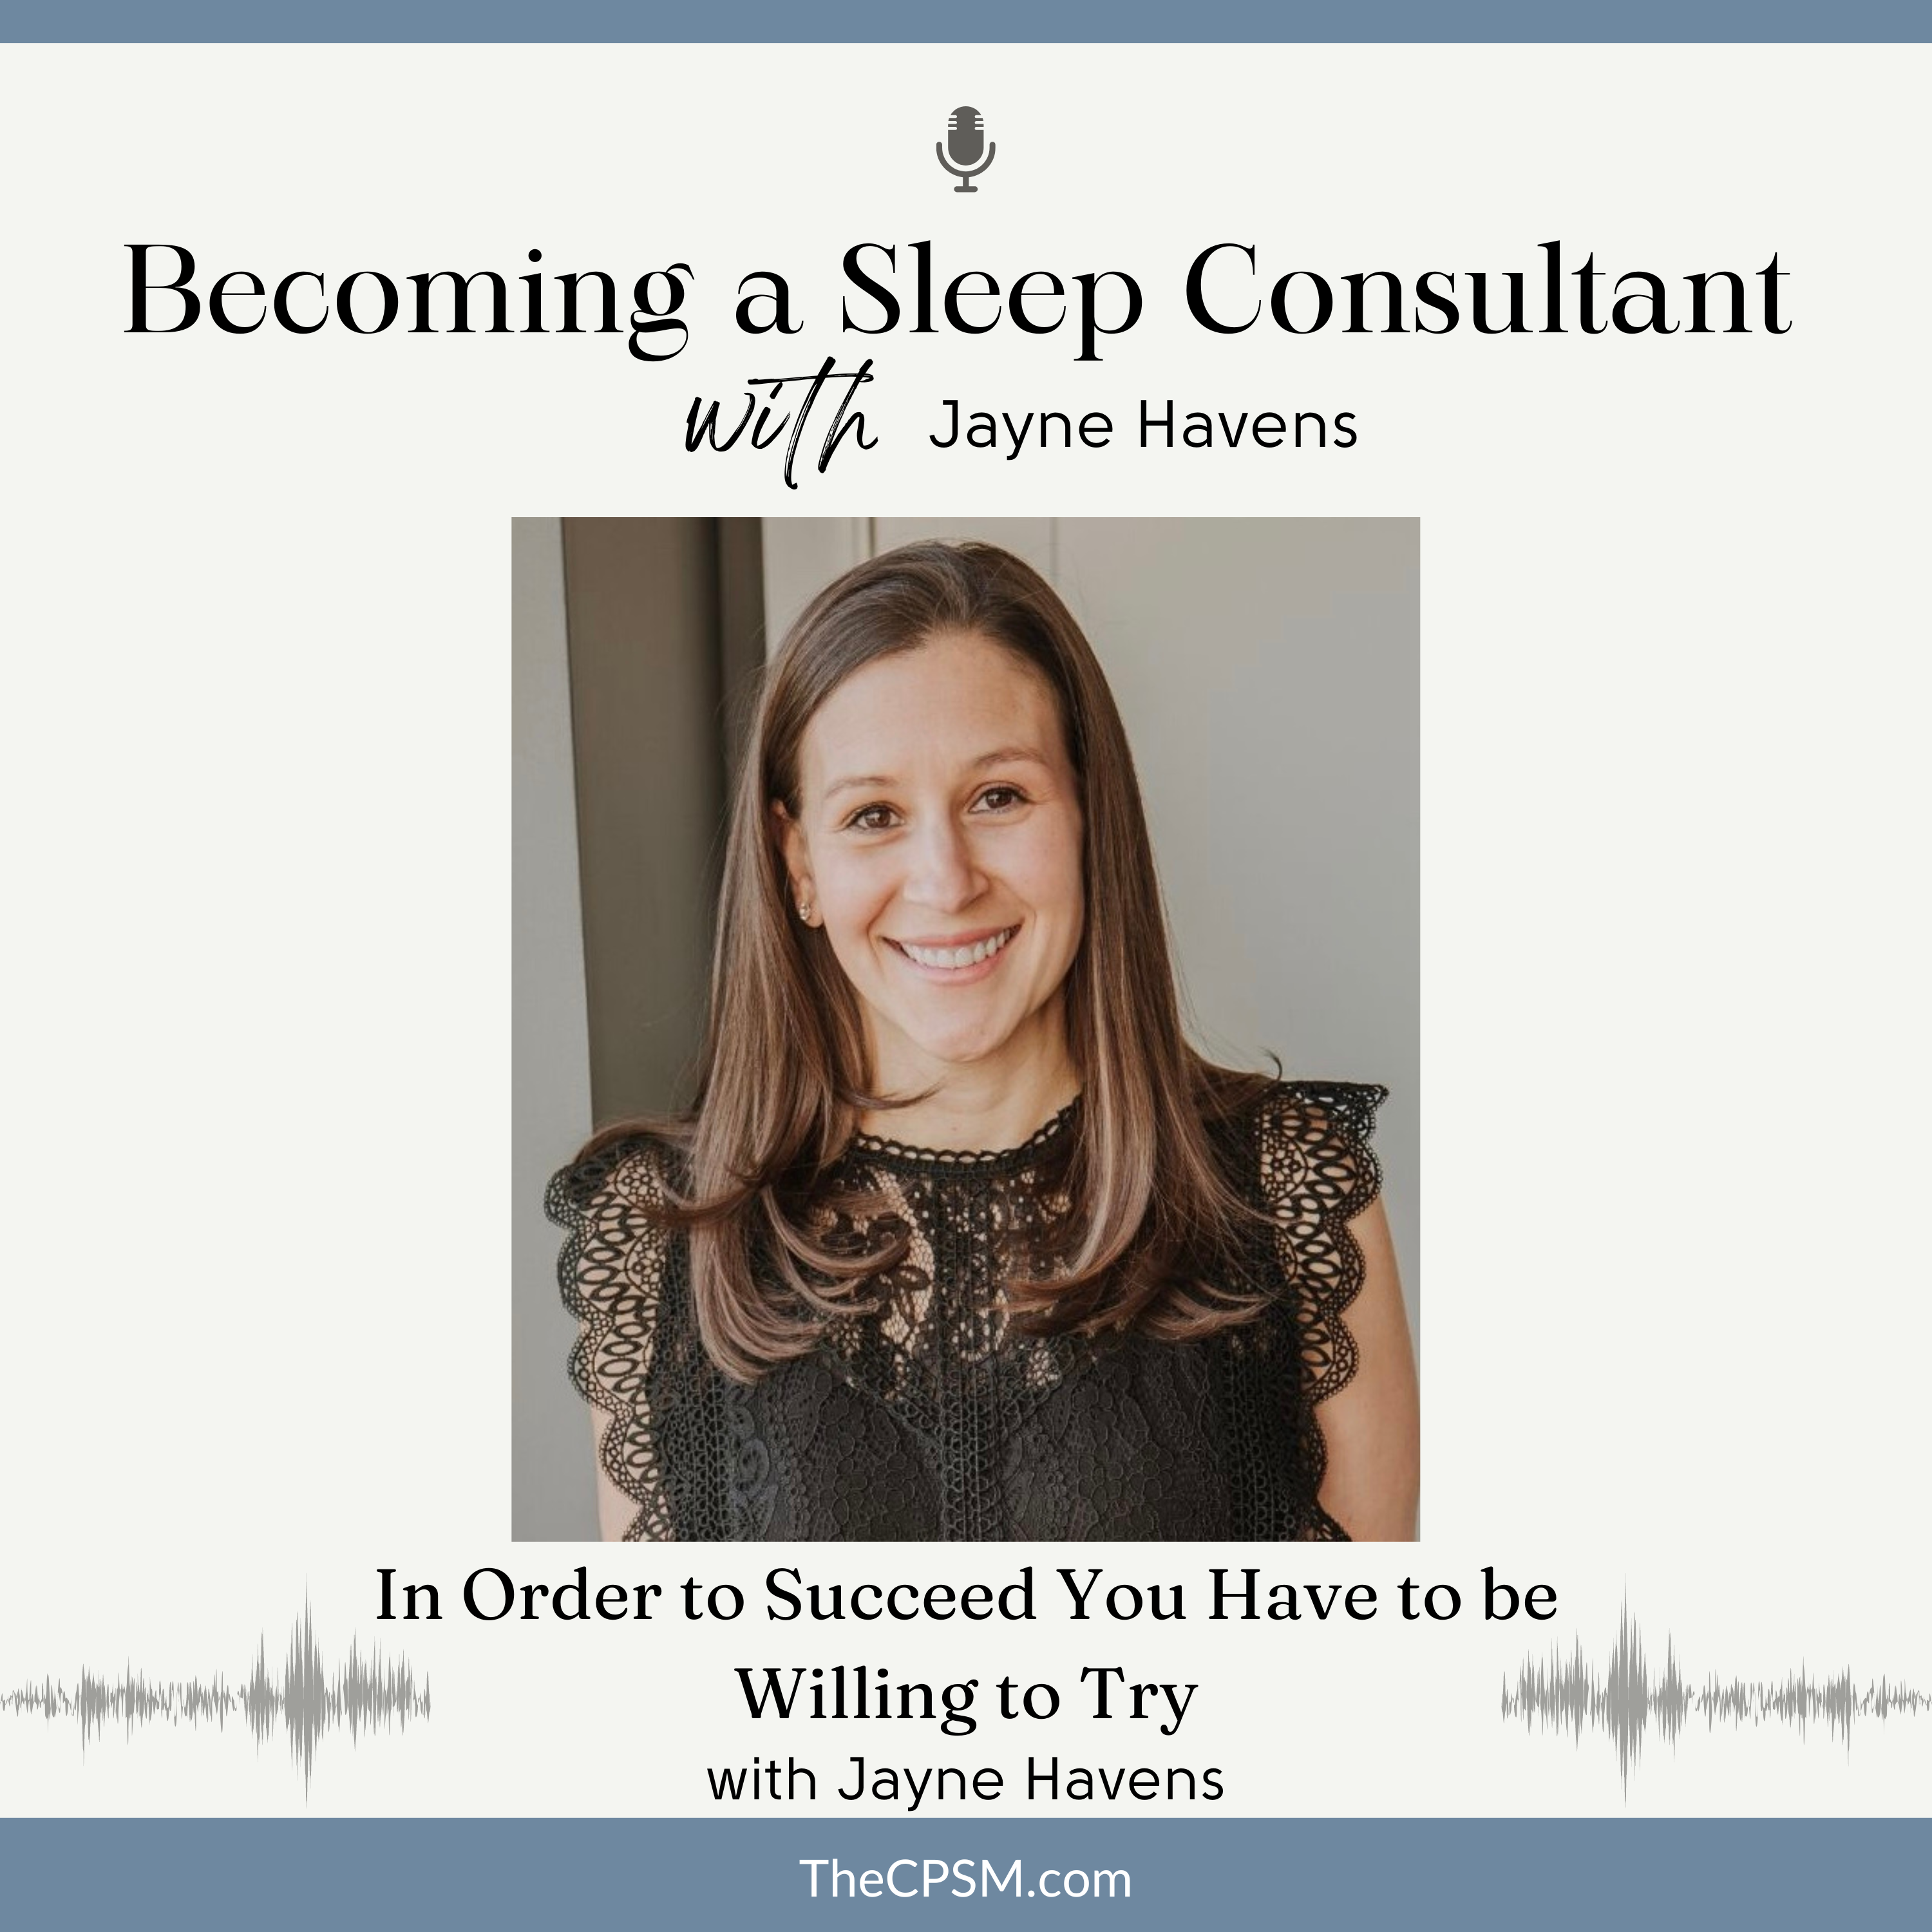 In Order to Succeed, You Have to be Willing to Try with Jayne Havens